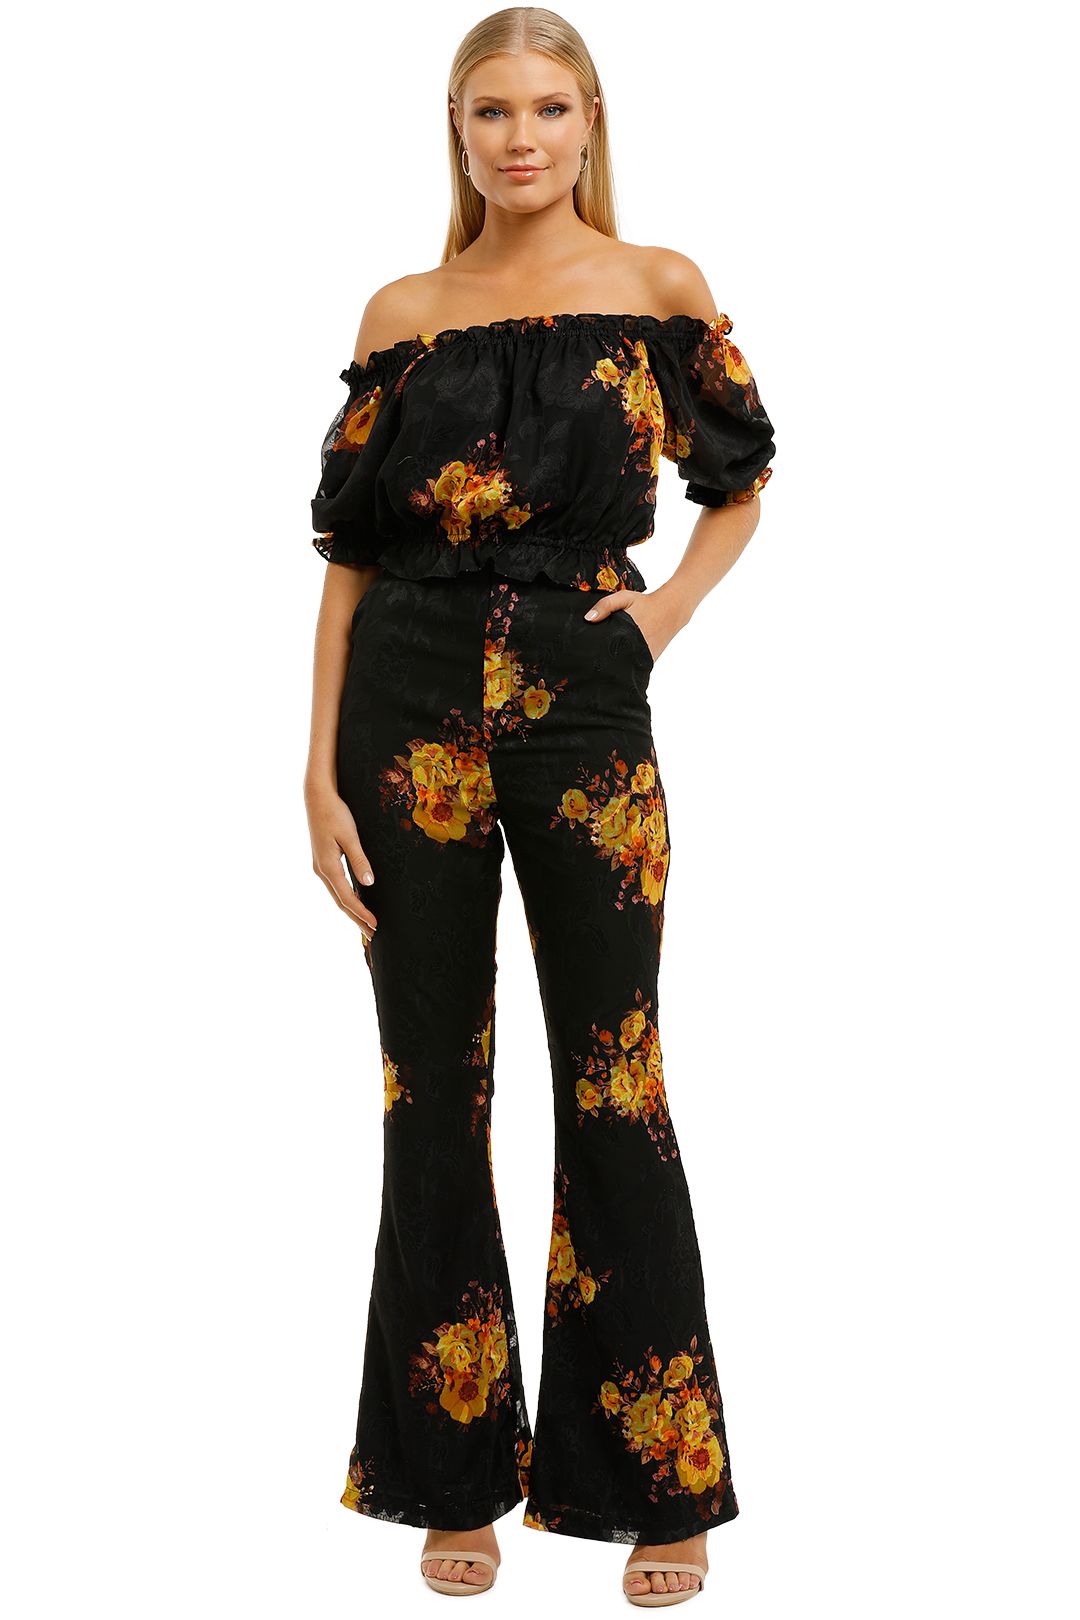 We-Are-Kindred-Ibiza-Top-and-Pant-Set-Noir-Sunflowers-Front